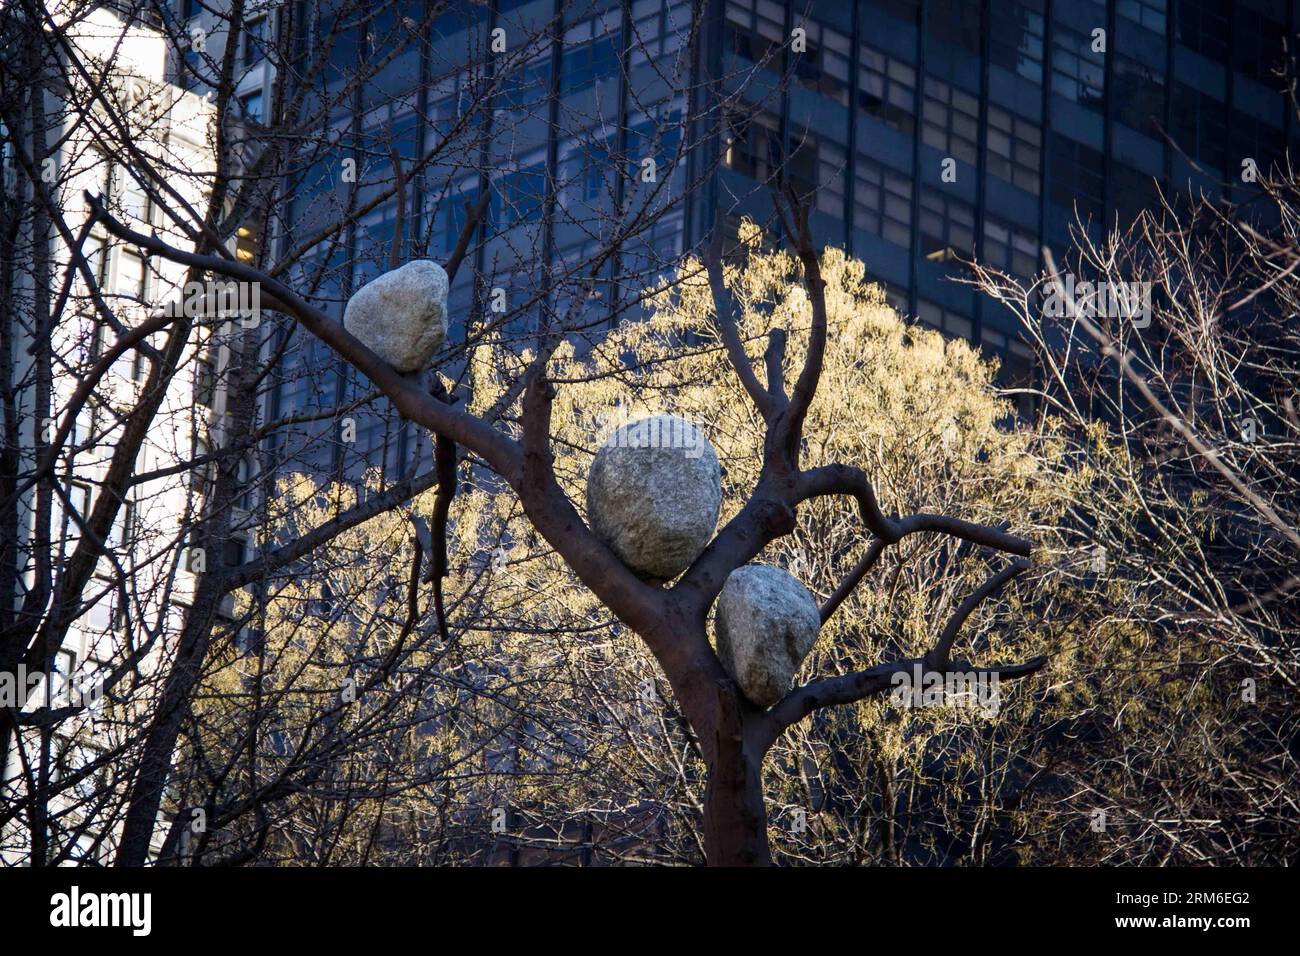 (140107) -- NEW YORK, Jan. 7, 2014 (Xinhua) -- A picture of one of the three bronze trees (with stones atop the arboreal branches) of Italian artist Giuseppe Penone s Ideas of Stone installation, at Madison Square Park in New York, on Jan. 7, 2014. Penone, a member of the Italian Arte Povera movement, employs commonplace materials and natural forms in his exploration of the relationship between man and nature. (Xinhua/Niu Xiaolei) US-NEW YORK-SCULPTURE-PENONE-IDEAS OF STONE PUBLICATIONxNOTxINxCHN   New York Jan 7 2014 XINHUA a Picture of One of The Three Bronze Trees With Stones atop The arbor Stock Photo